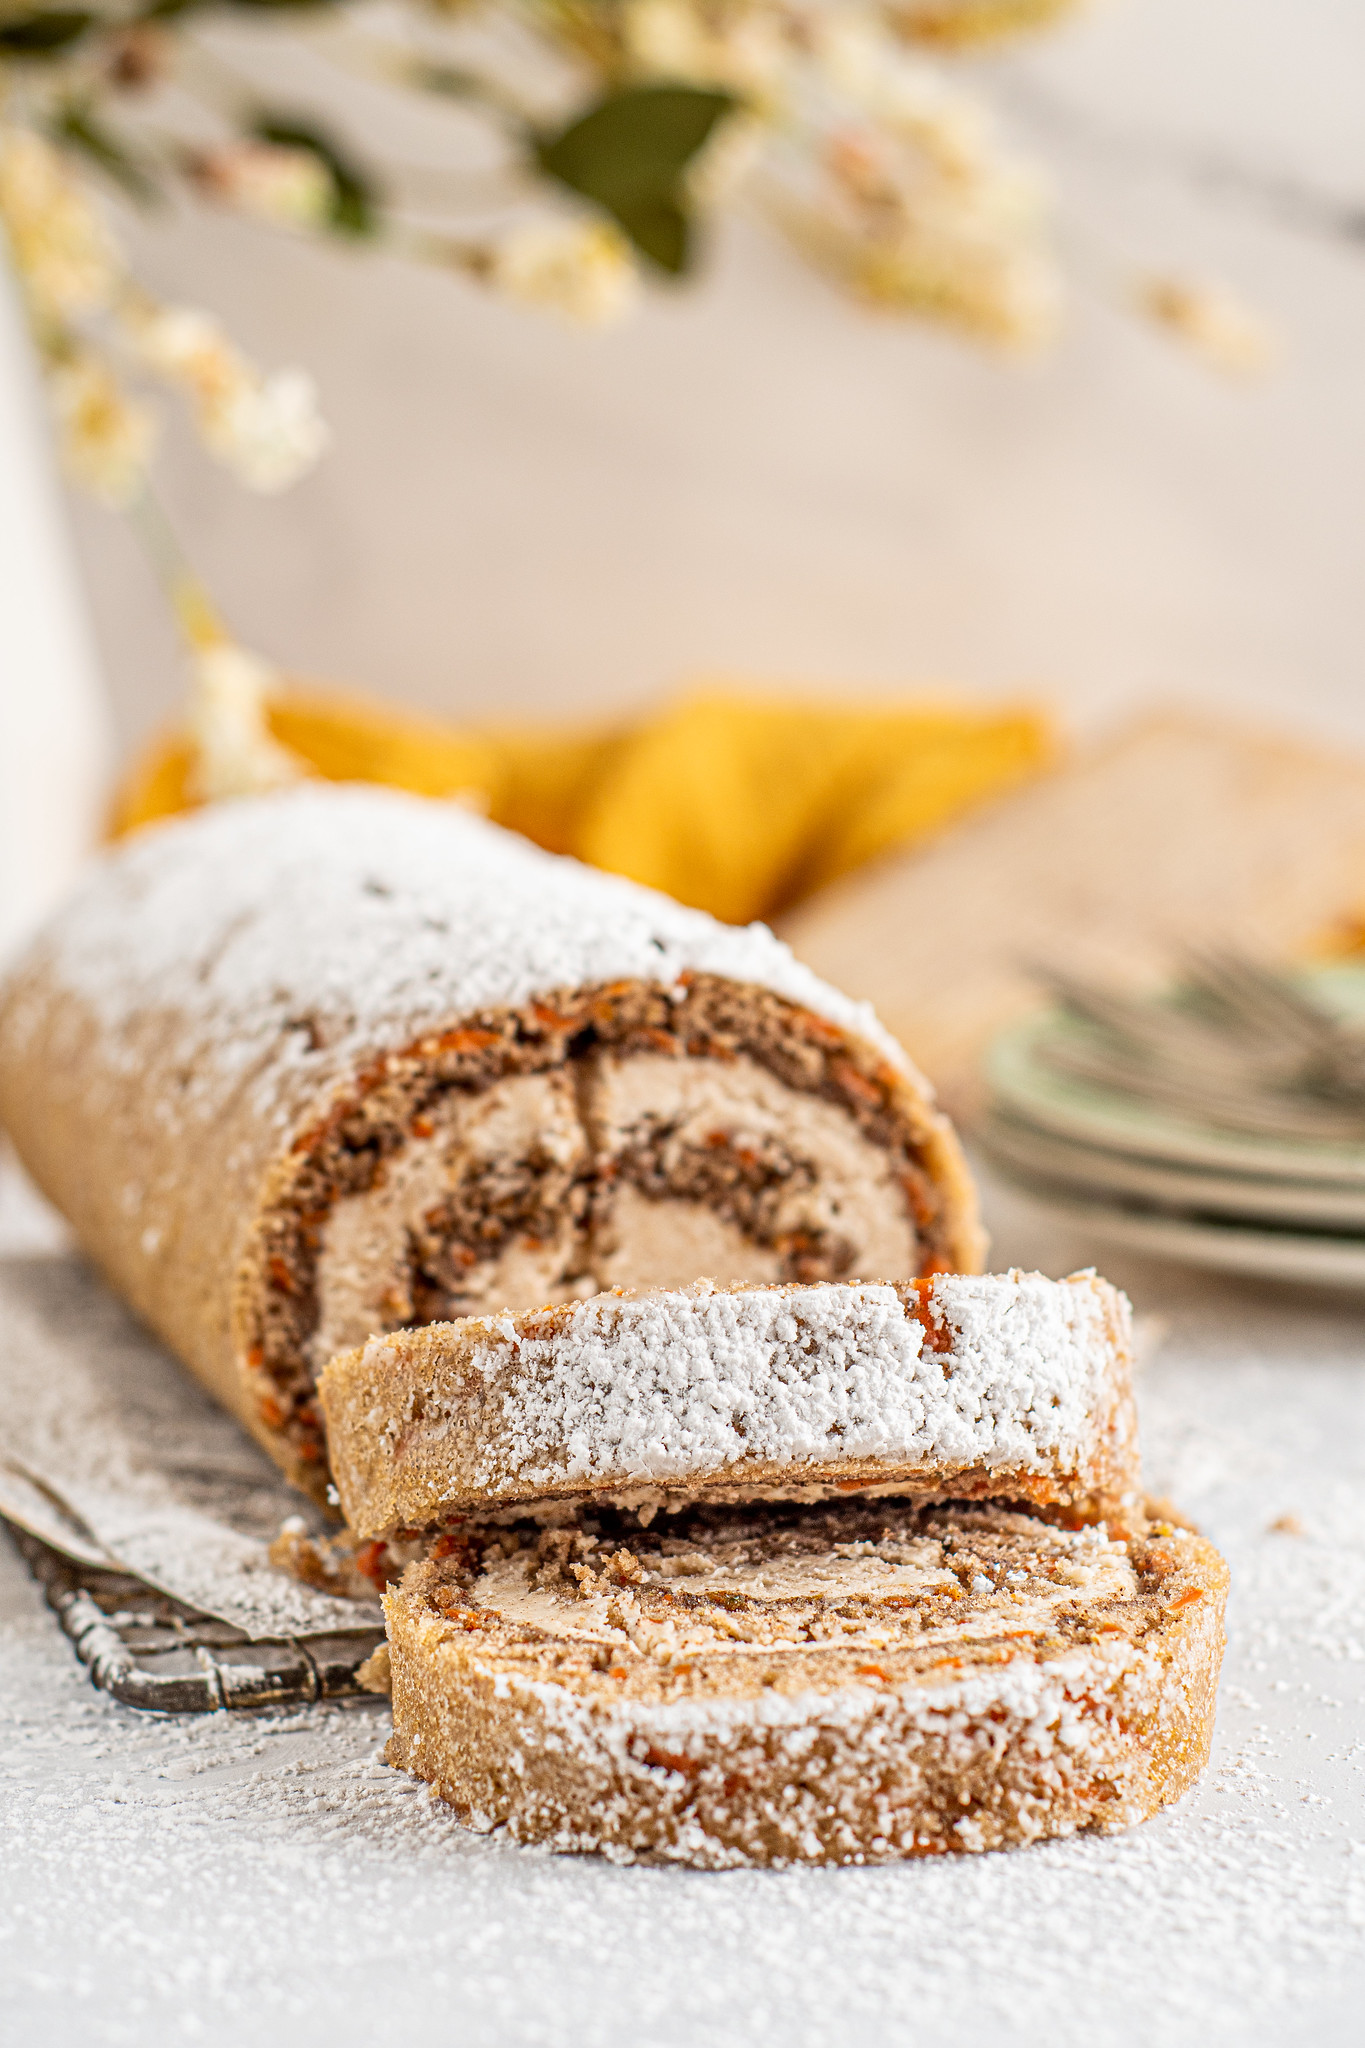 Carrot cake roll dusted with powdered sugar with 2 slices in the foreground